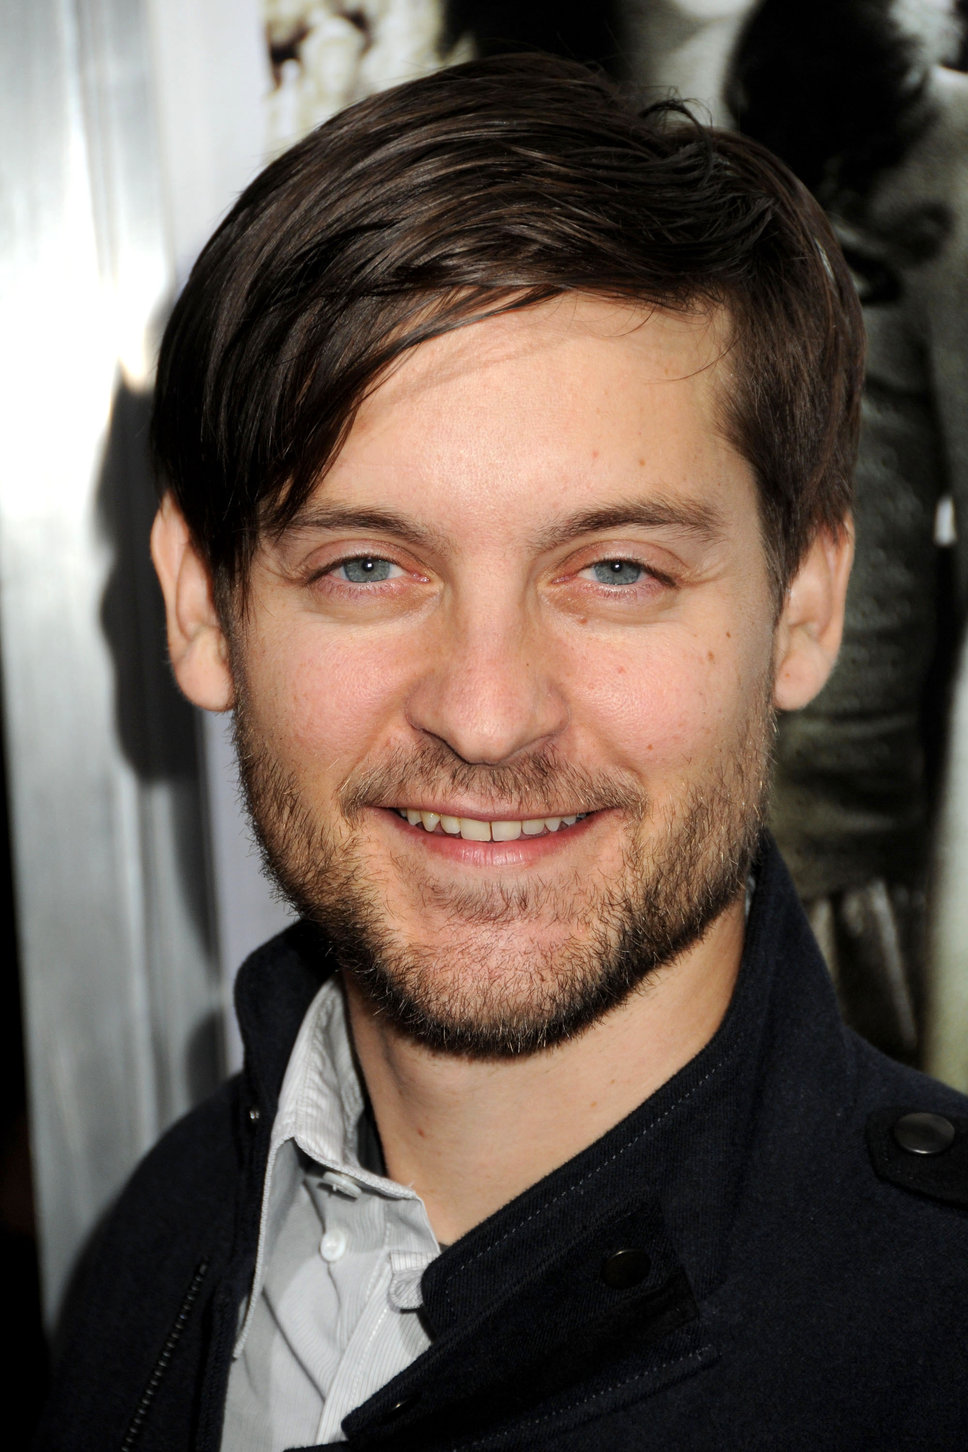 Tobey Maguire, His father robbed banks